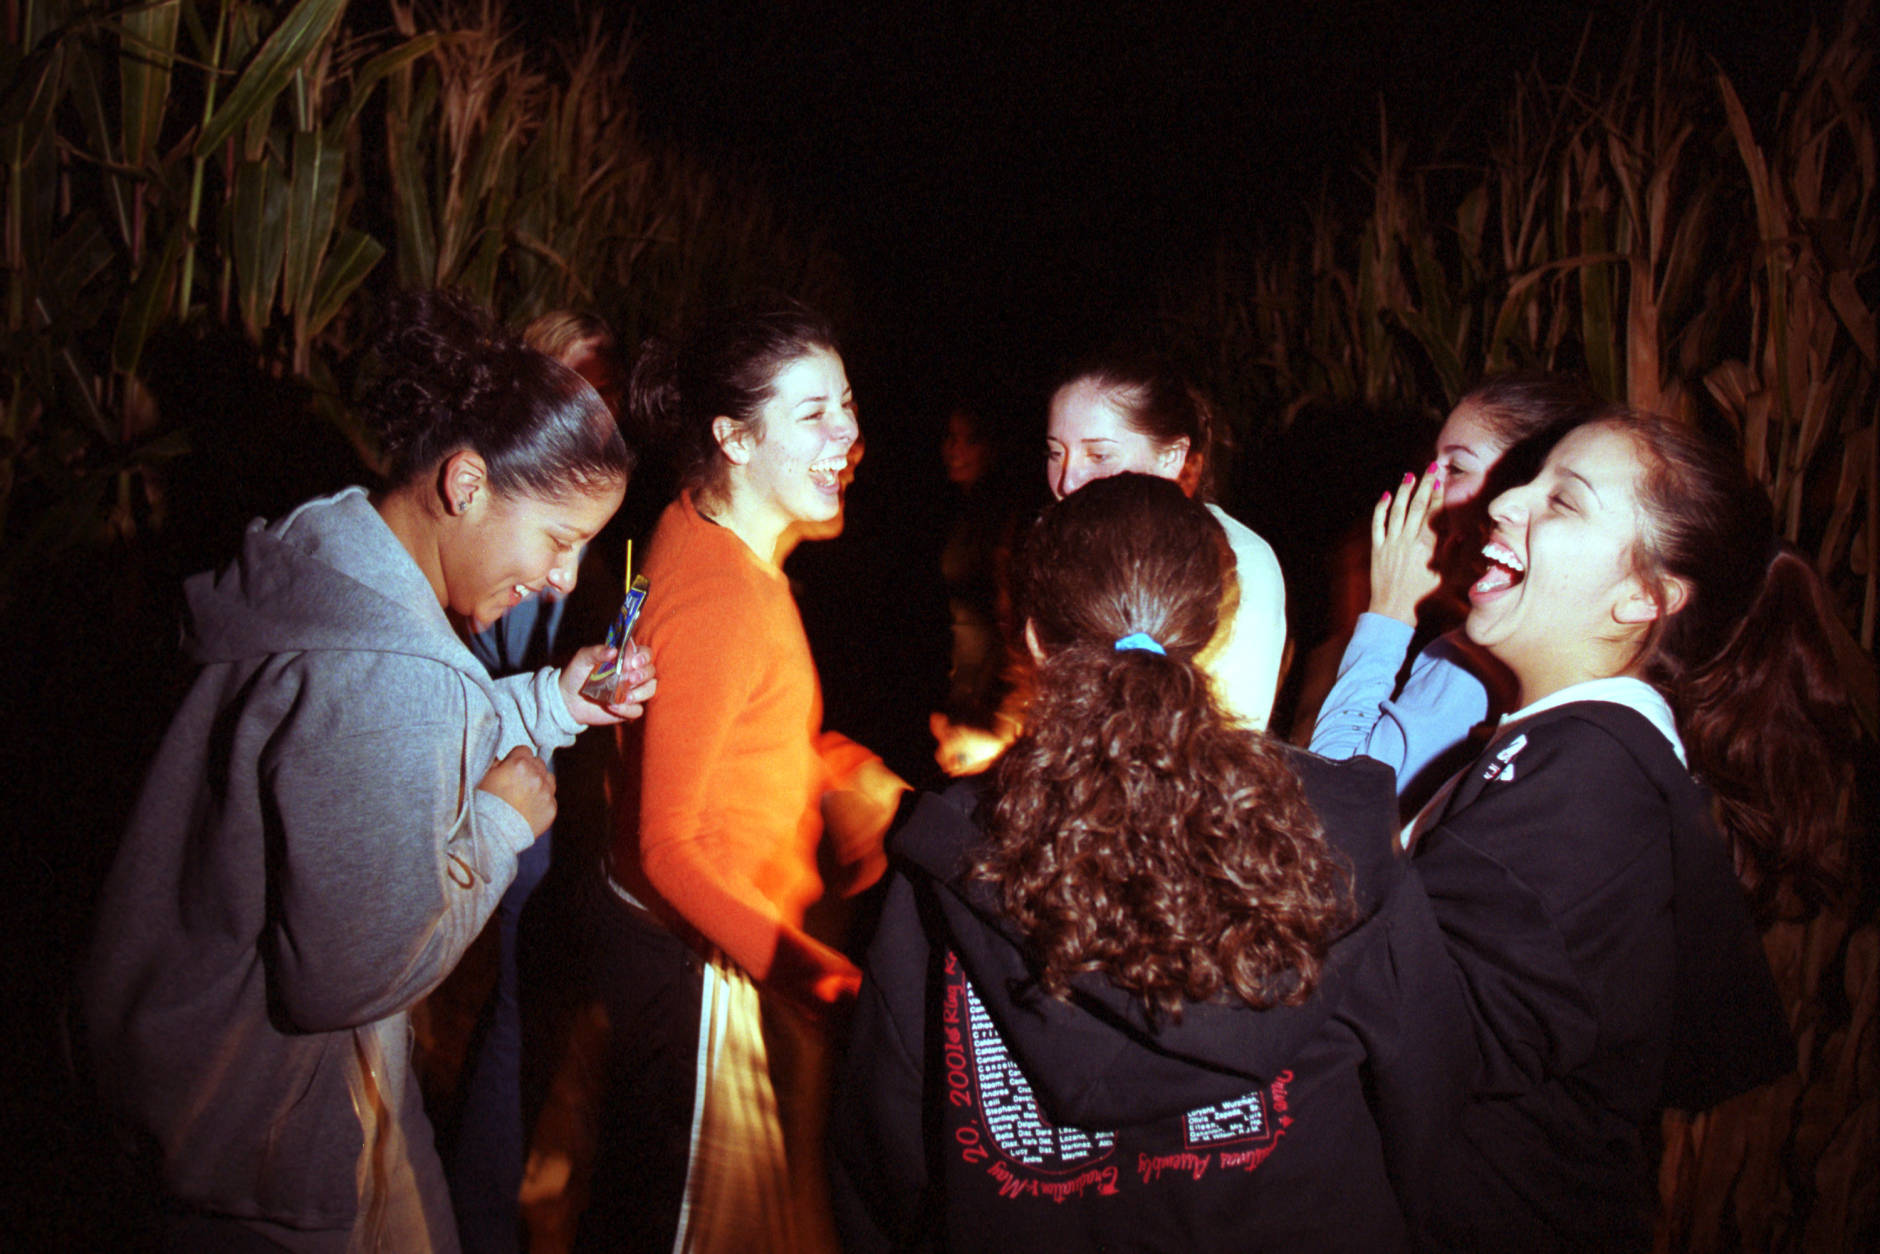 381329 06: A group of girls laugh together as they try navigate through a 10 acre cornfield maze October 19, 2000 in La Union, NM. The local farmer who built the maze is one of many using tourism as a way to supplement their income. The maze was designed using a GPS system to mark out the trail. (Photo by Joe Raedle/Newsmakers)